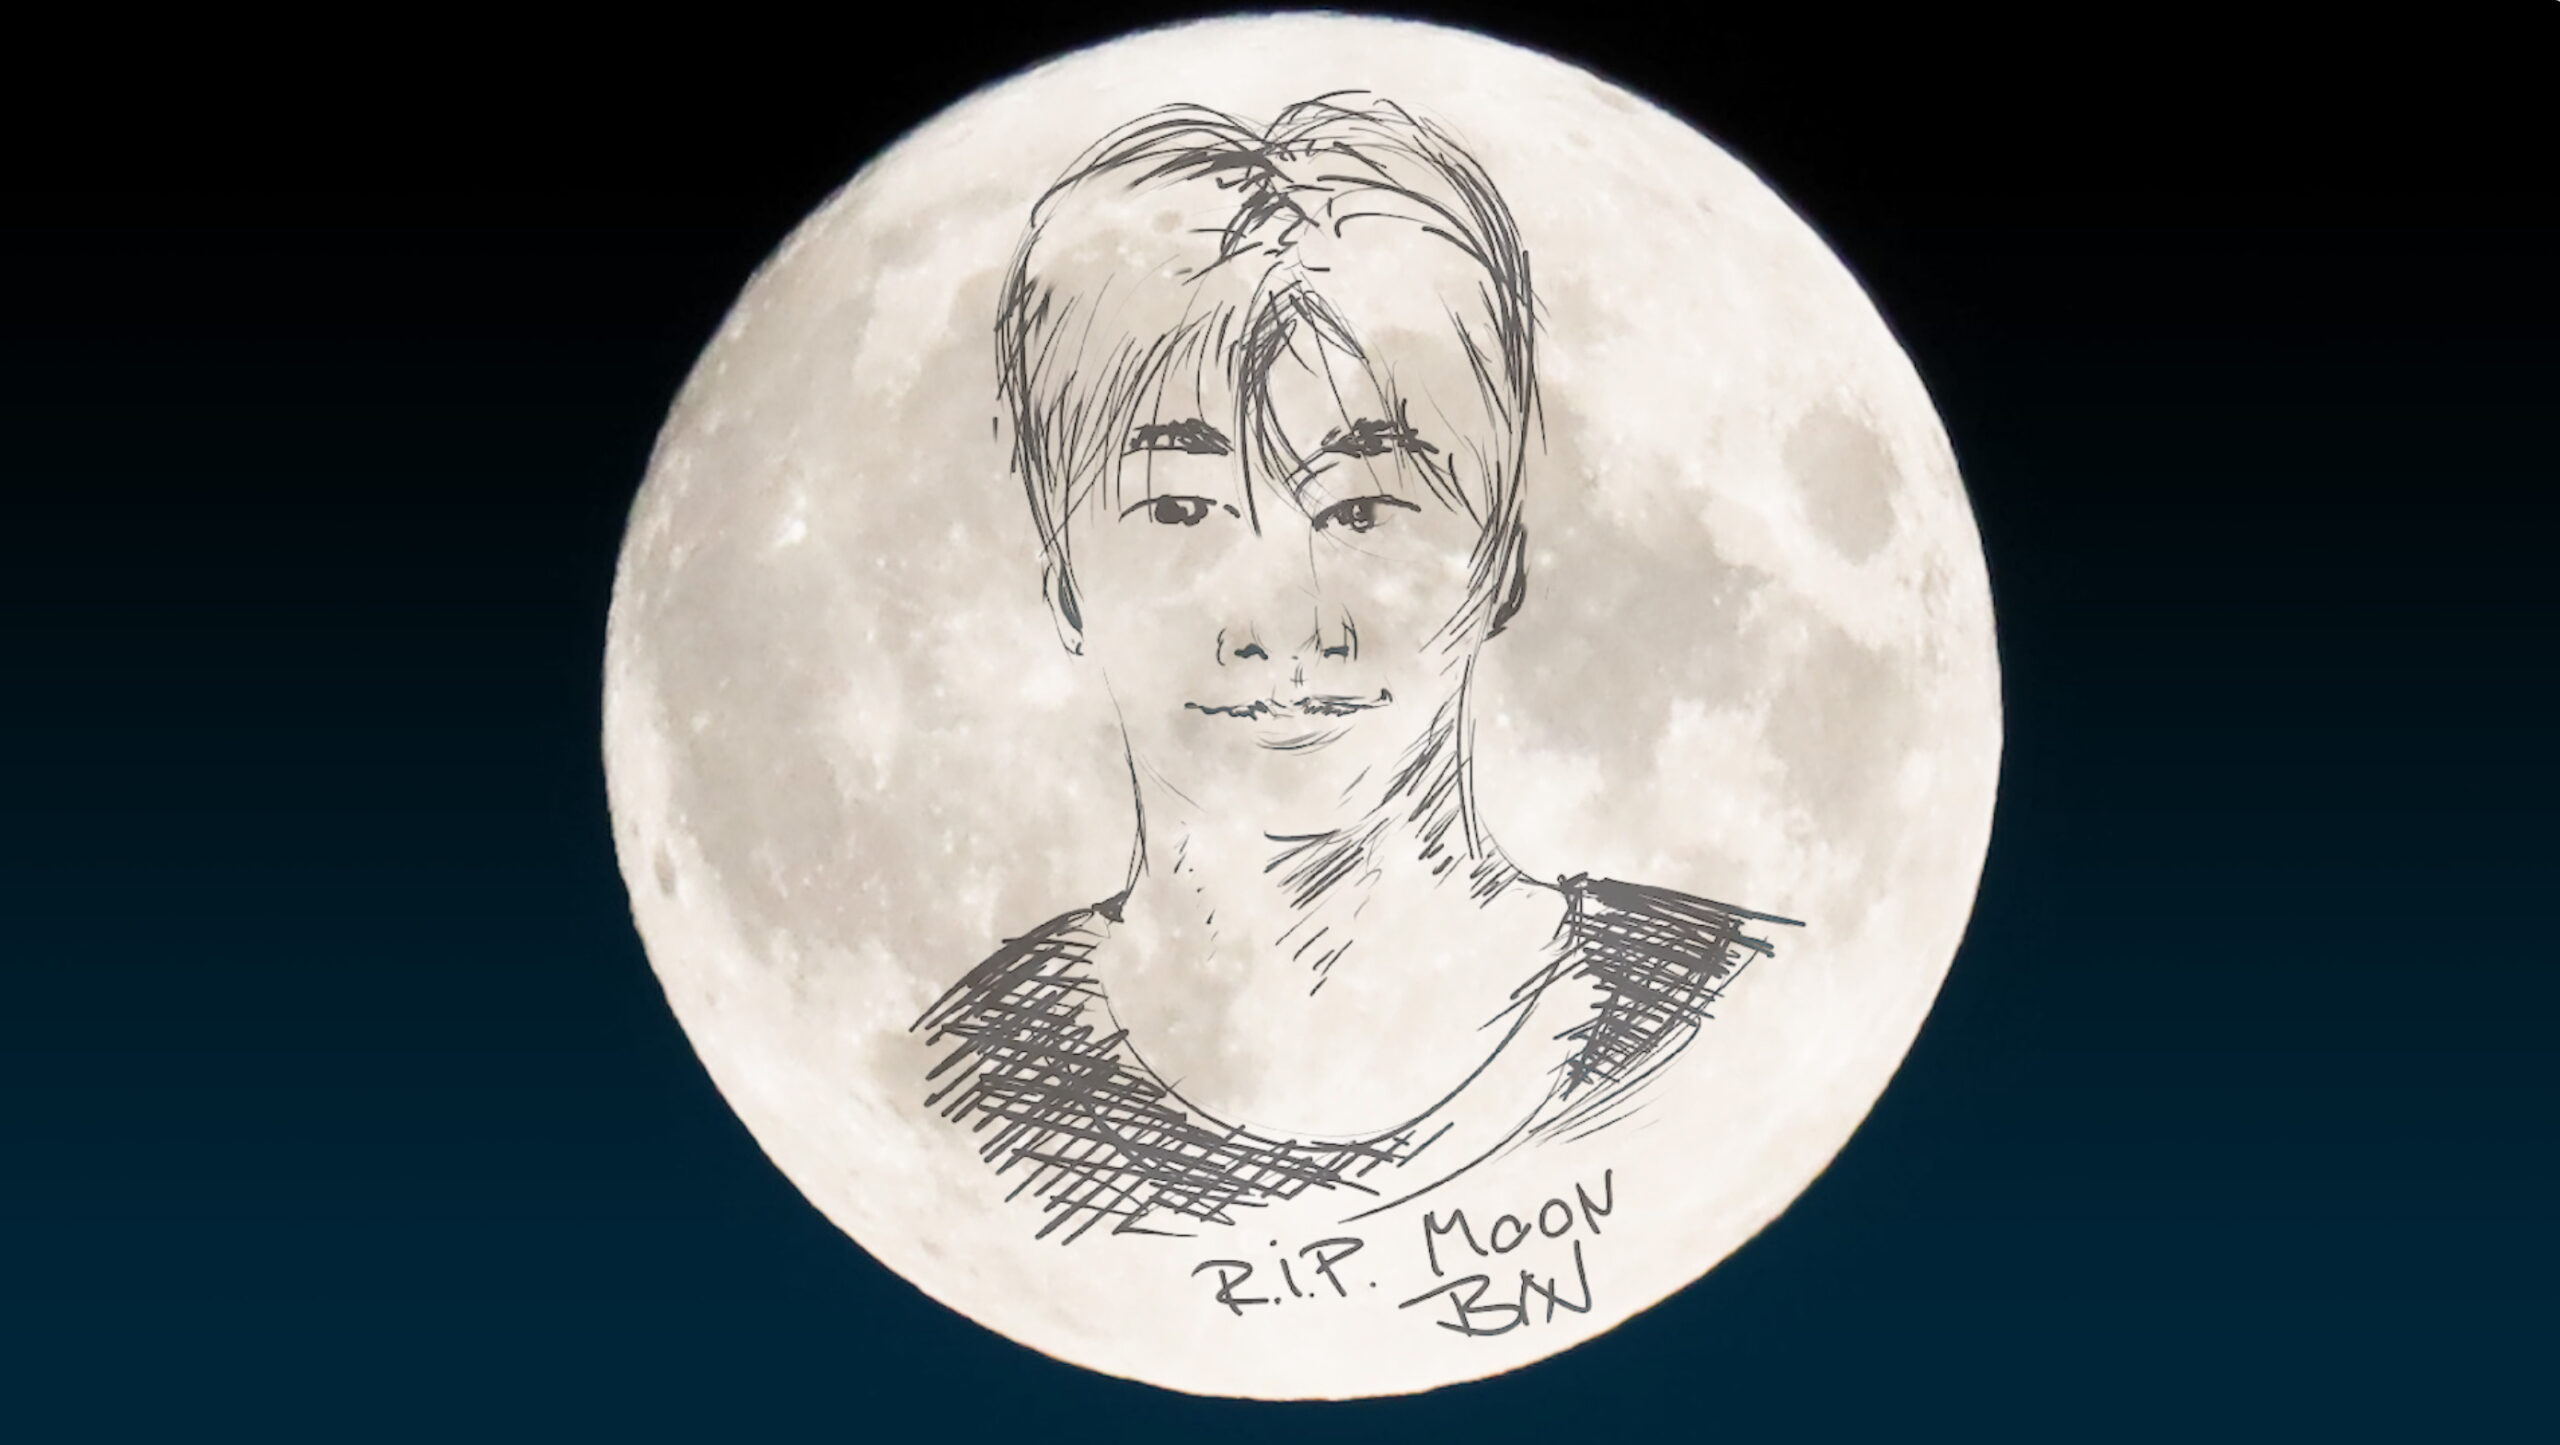 Moon Bin Portrait drawing - beneft fundraiser for a good cause - a group of people turns grief into something for the living